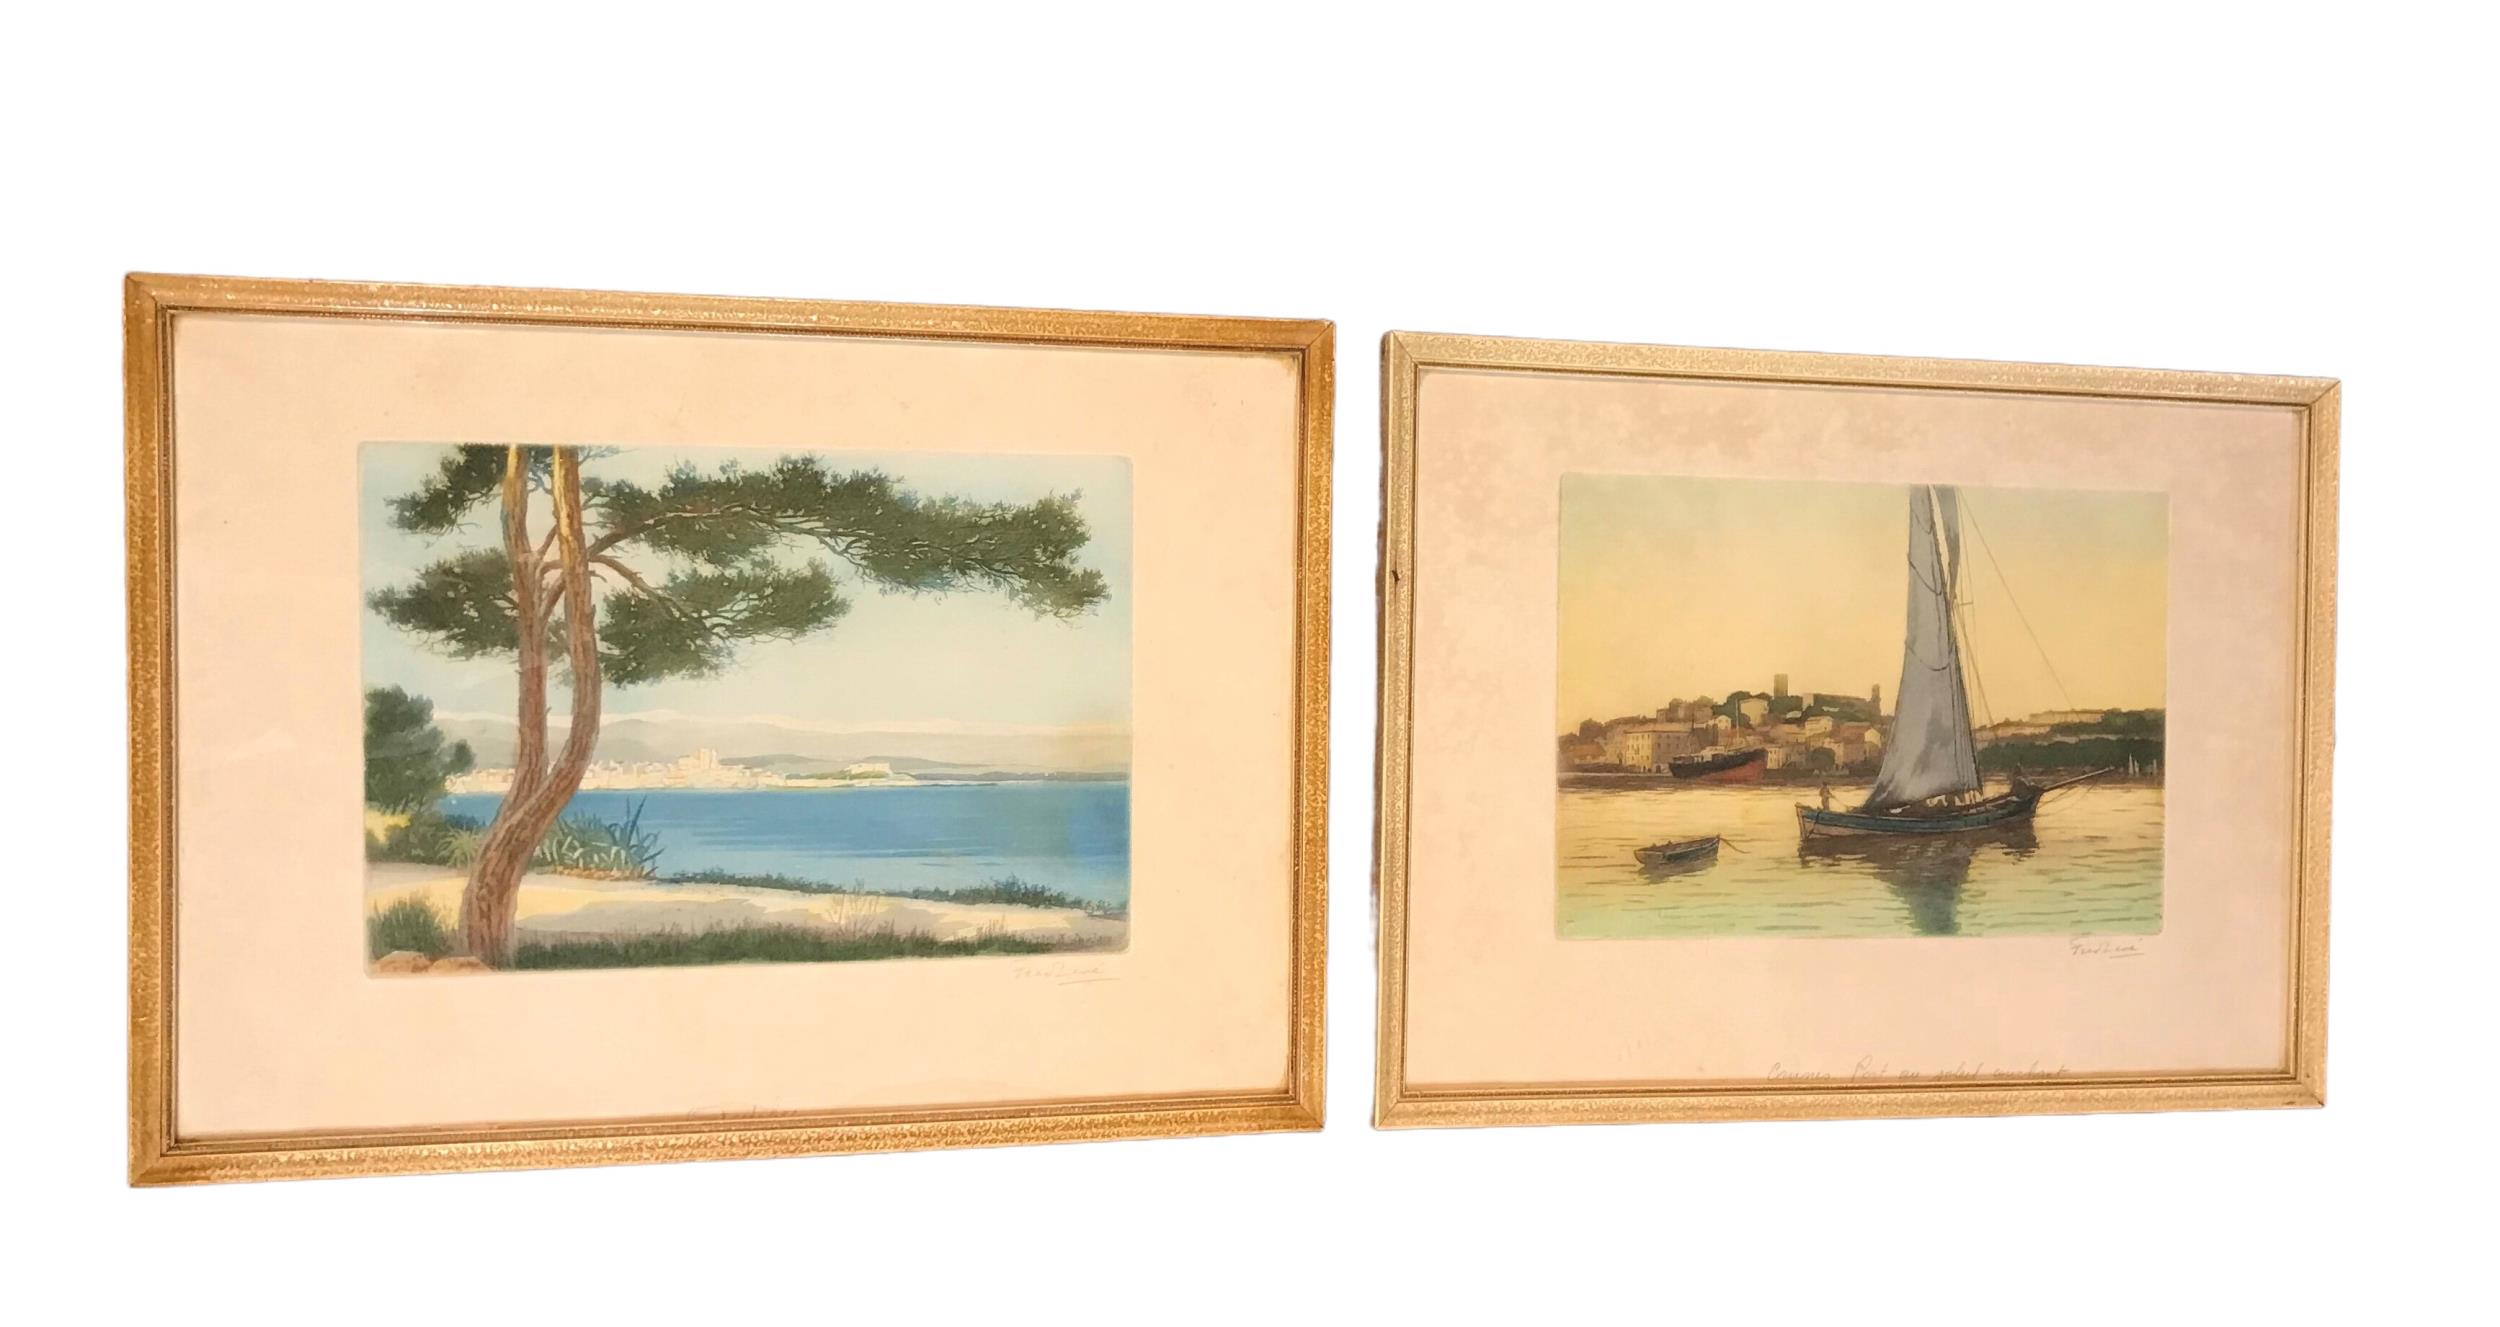 FRÉDÉRIC LOUIS LEVÉ, 1877 - 1968, A PAIR OF 20TH CENTURY PRINTS TITLED ‘CANNES PORT AT SUNSET’ AND